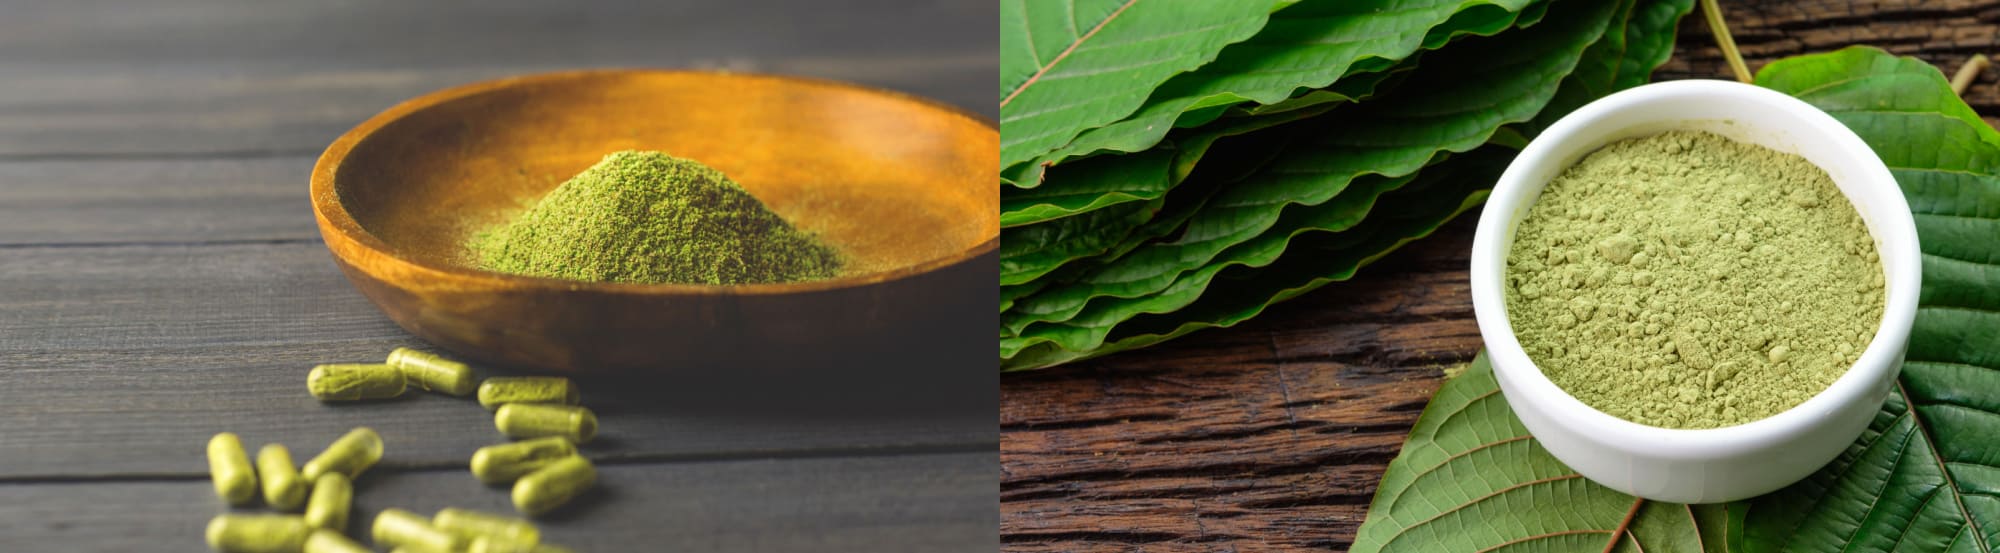 image of comparison between red dragon and red maeng da kratom